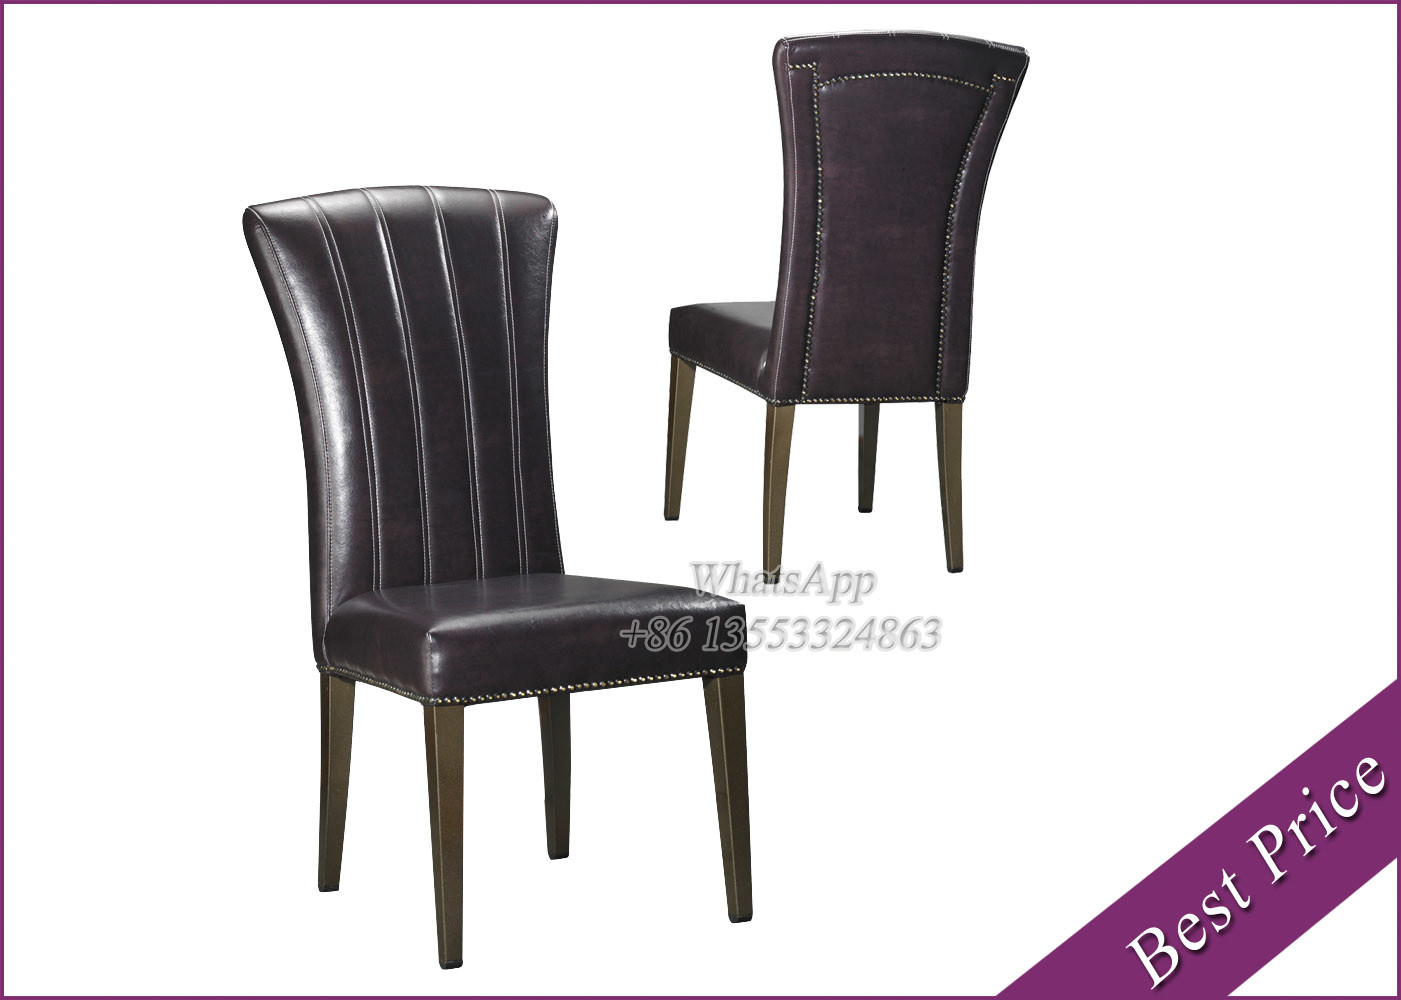 Leather Black Dining Chair For Sale From Chinese Furniture Factory (YA-33)